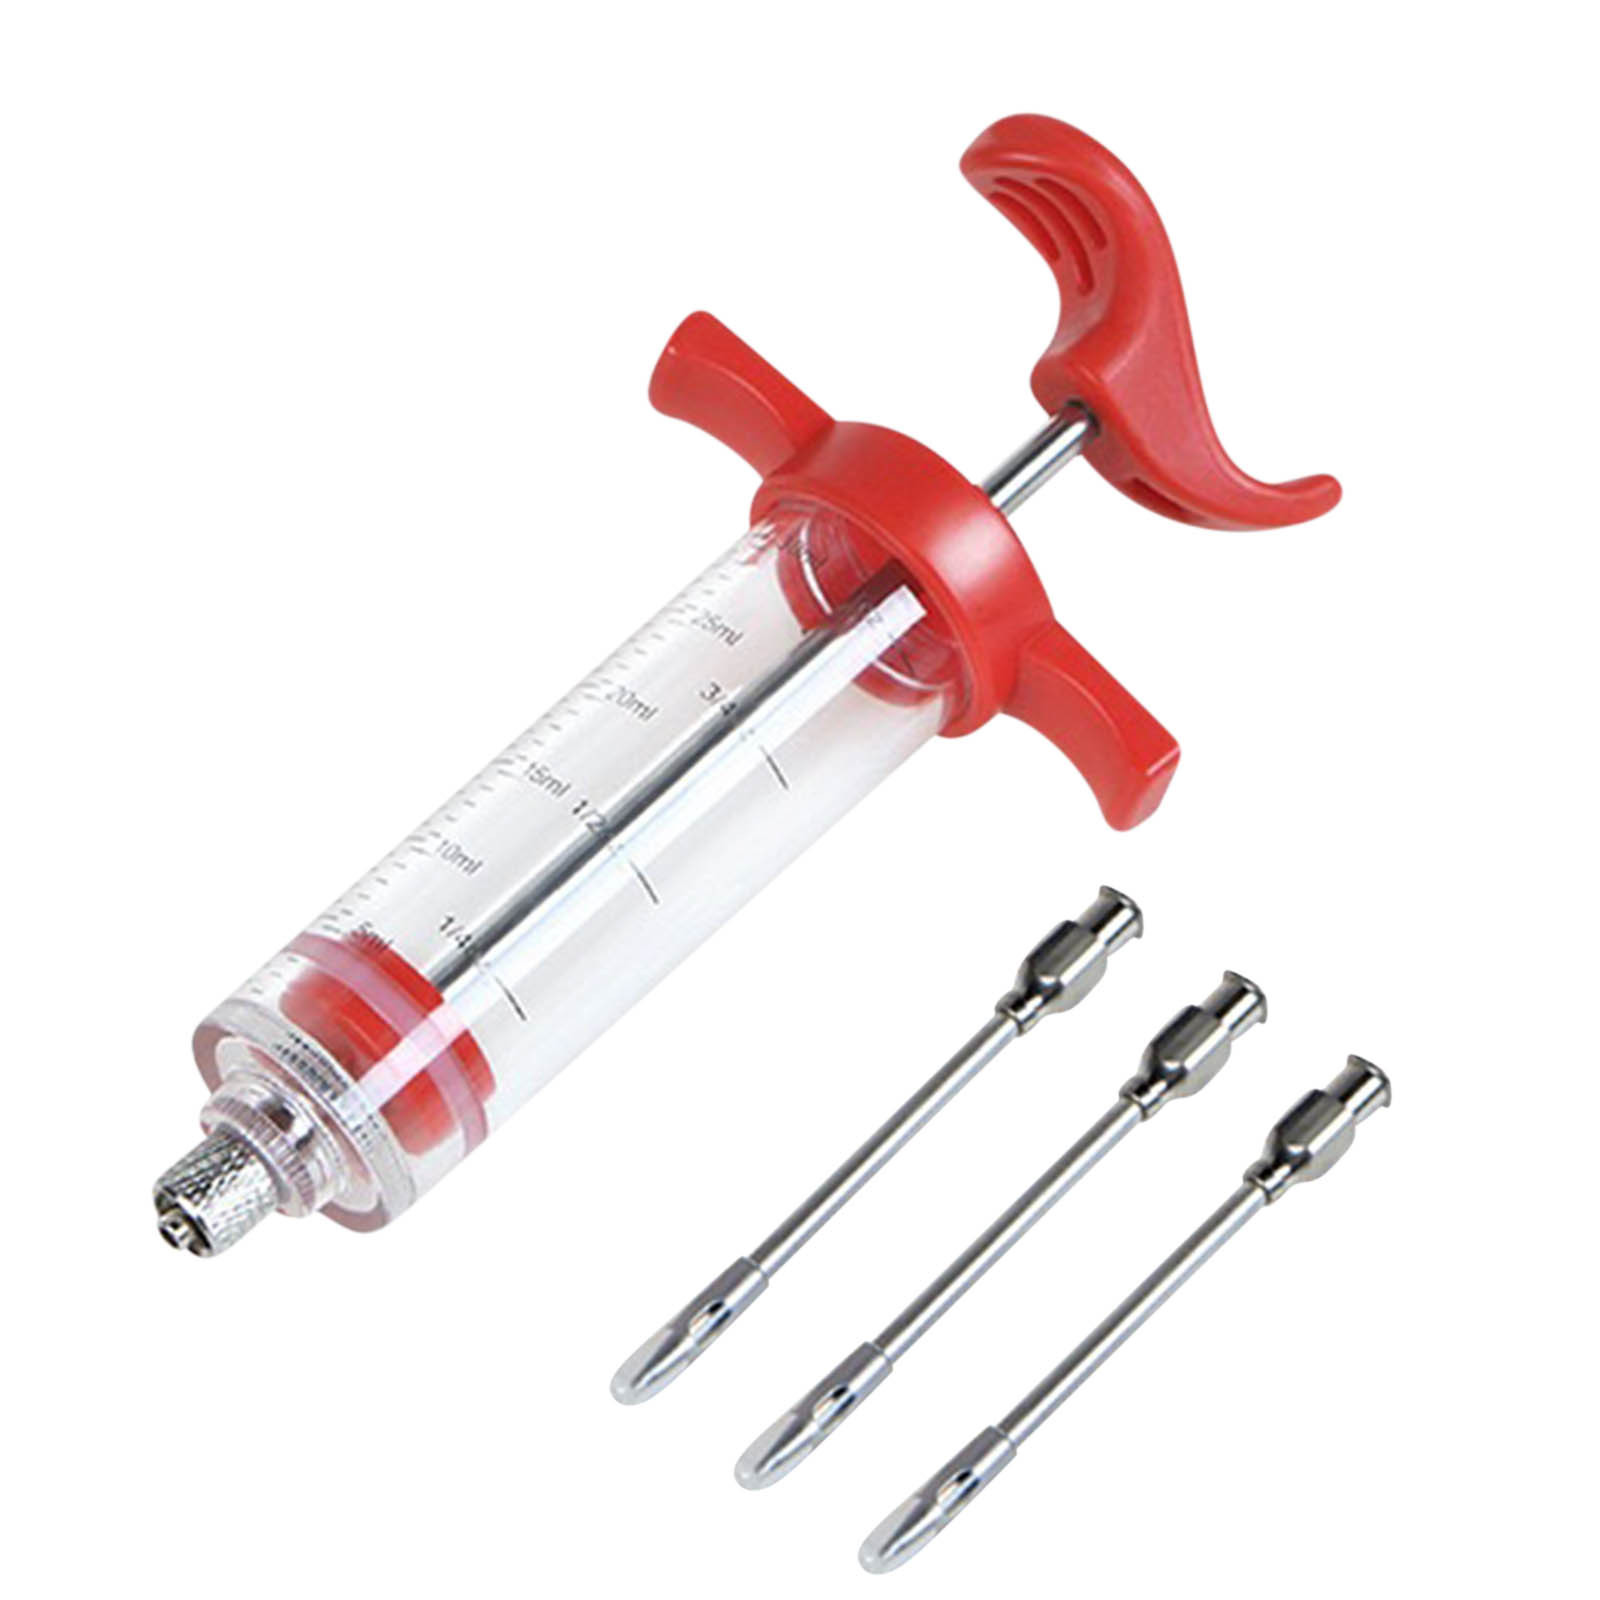 Herrnalise Stainless Steel Meat Injector Syringe For BBQ Grill Professional-Smoker Seasoning Culinary Barbecue Syringe Barbecue Tool Kitchen Essentials for New Home - image 2 of 9